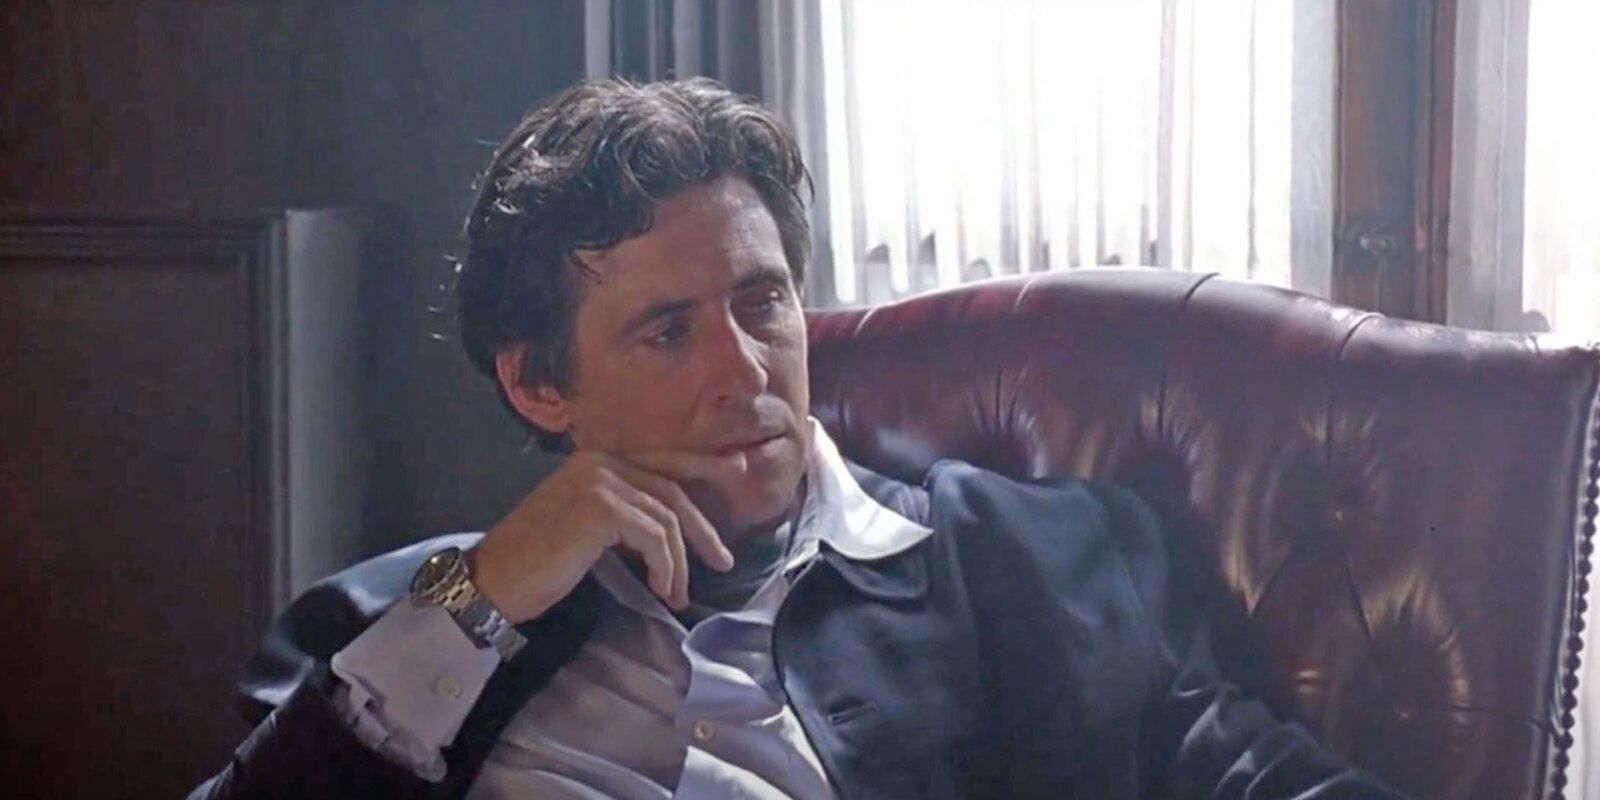 Gabriel Byrne as Keaton in The Usual Suspects